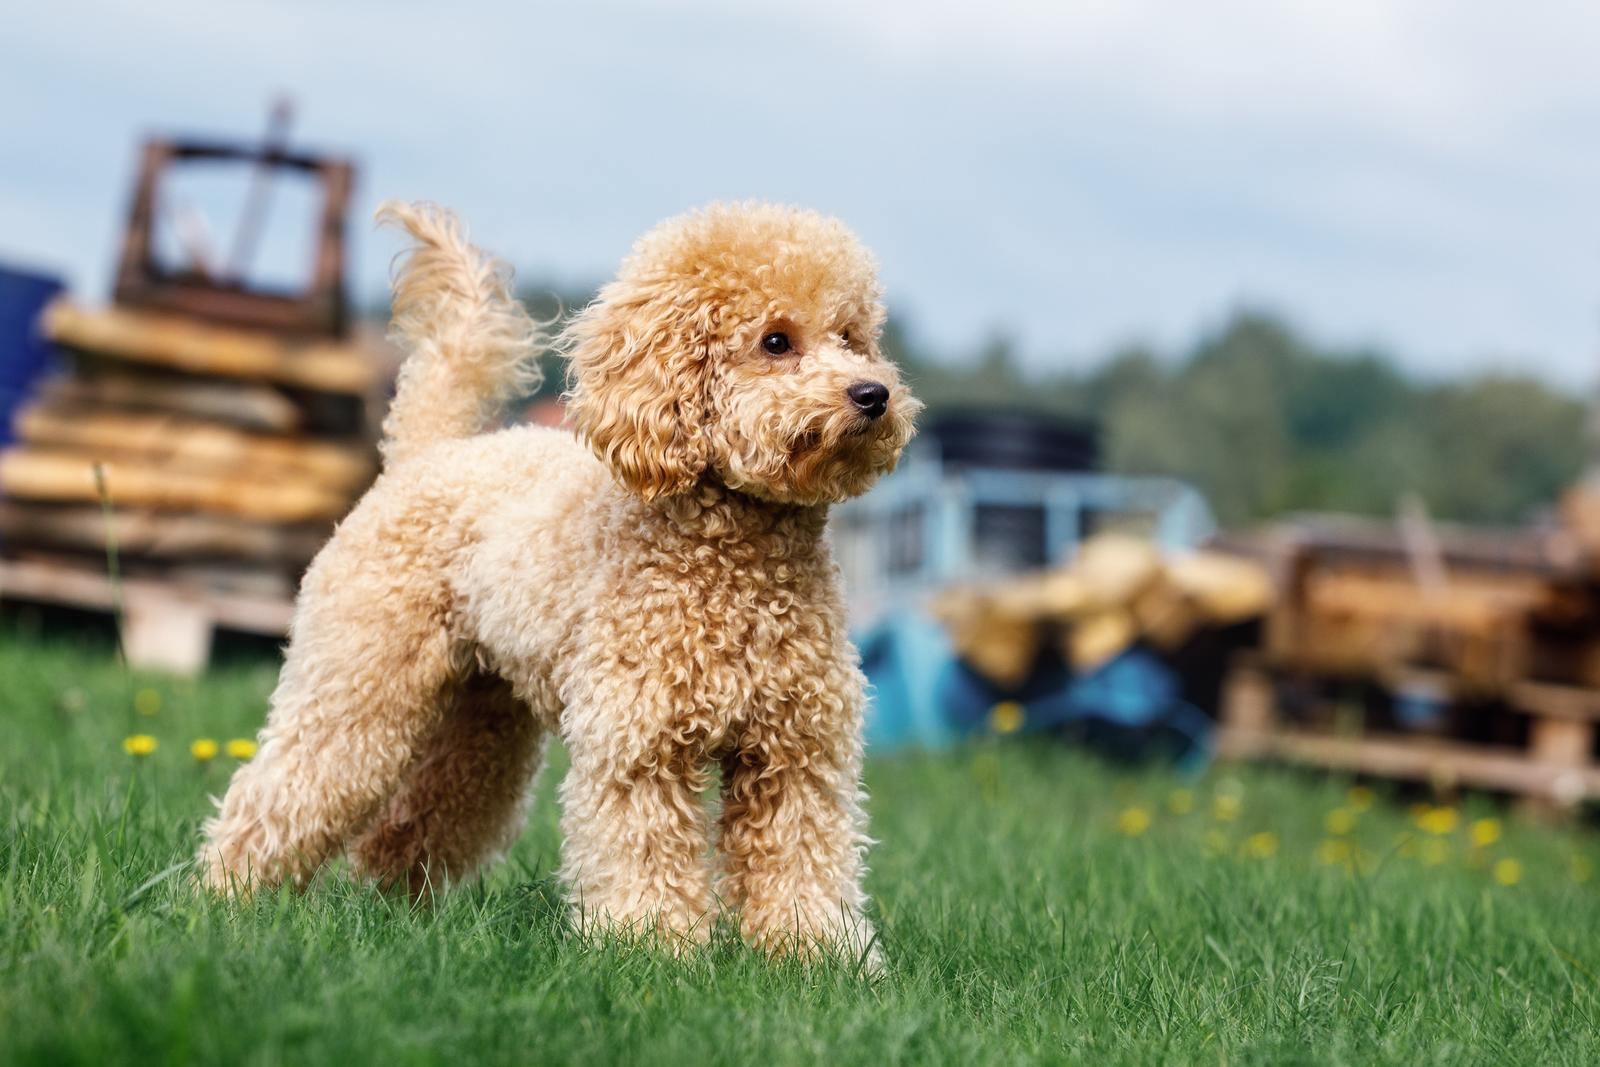 Can a person who has dog allergies get a poodle?